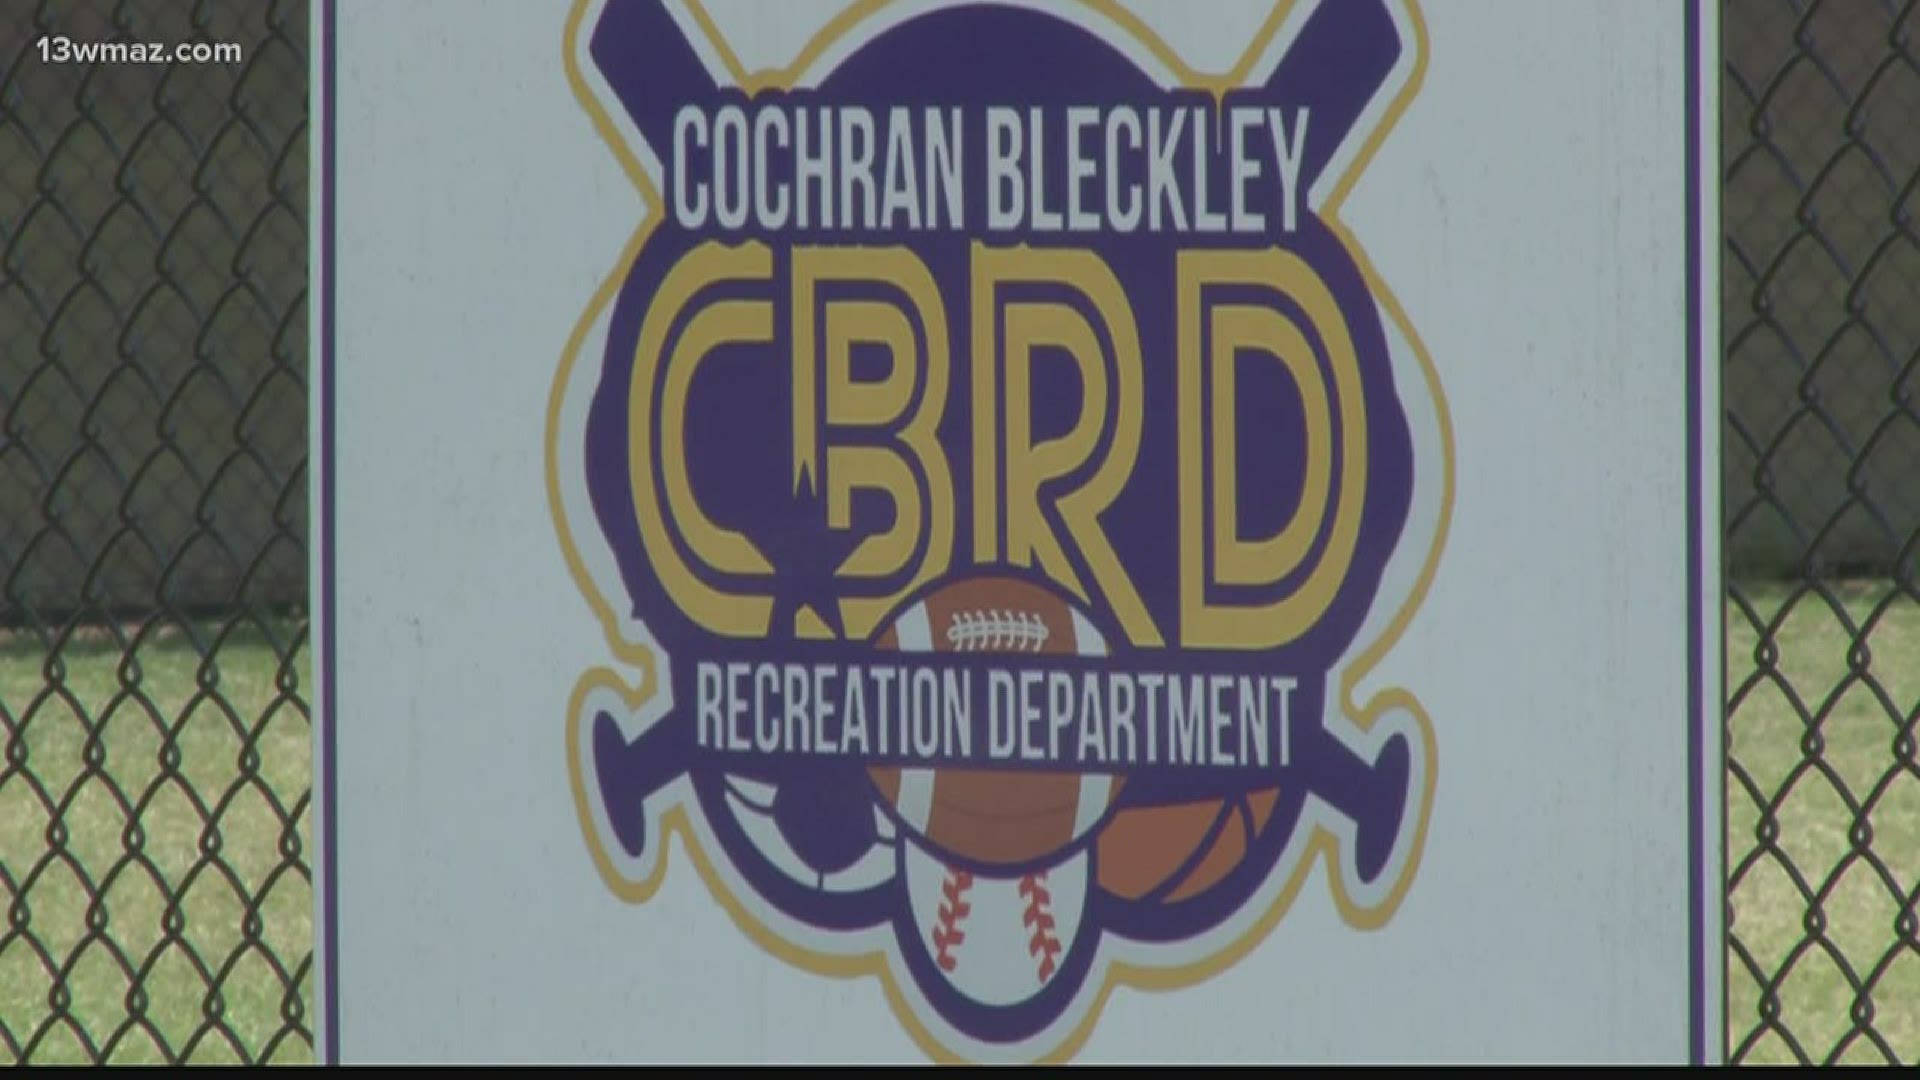 In Bleckley County, baseball travel teams are coming in from across the state for a tournament, but county and city officials disagree with the decision to resume.